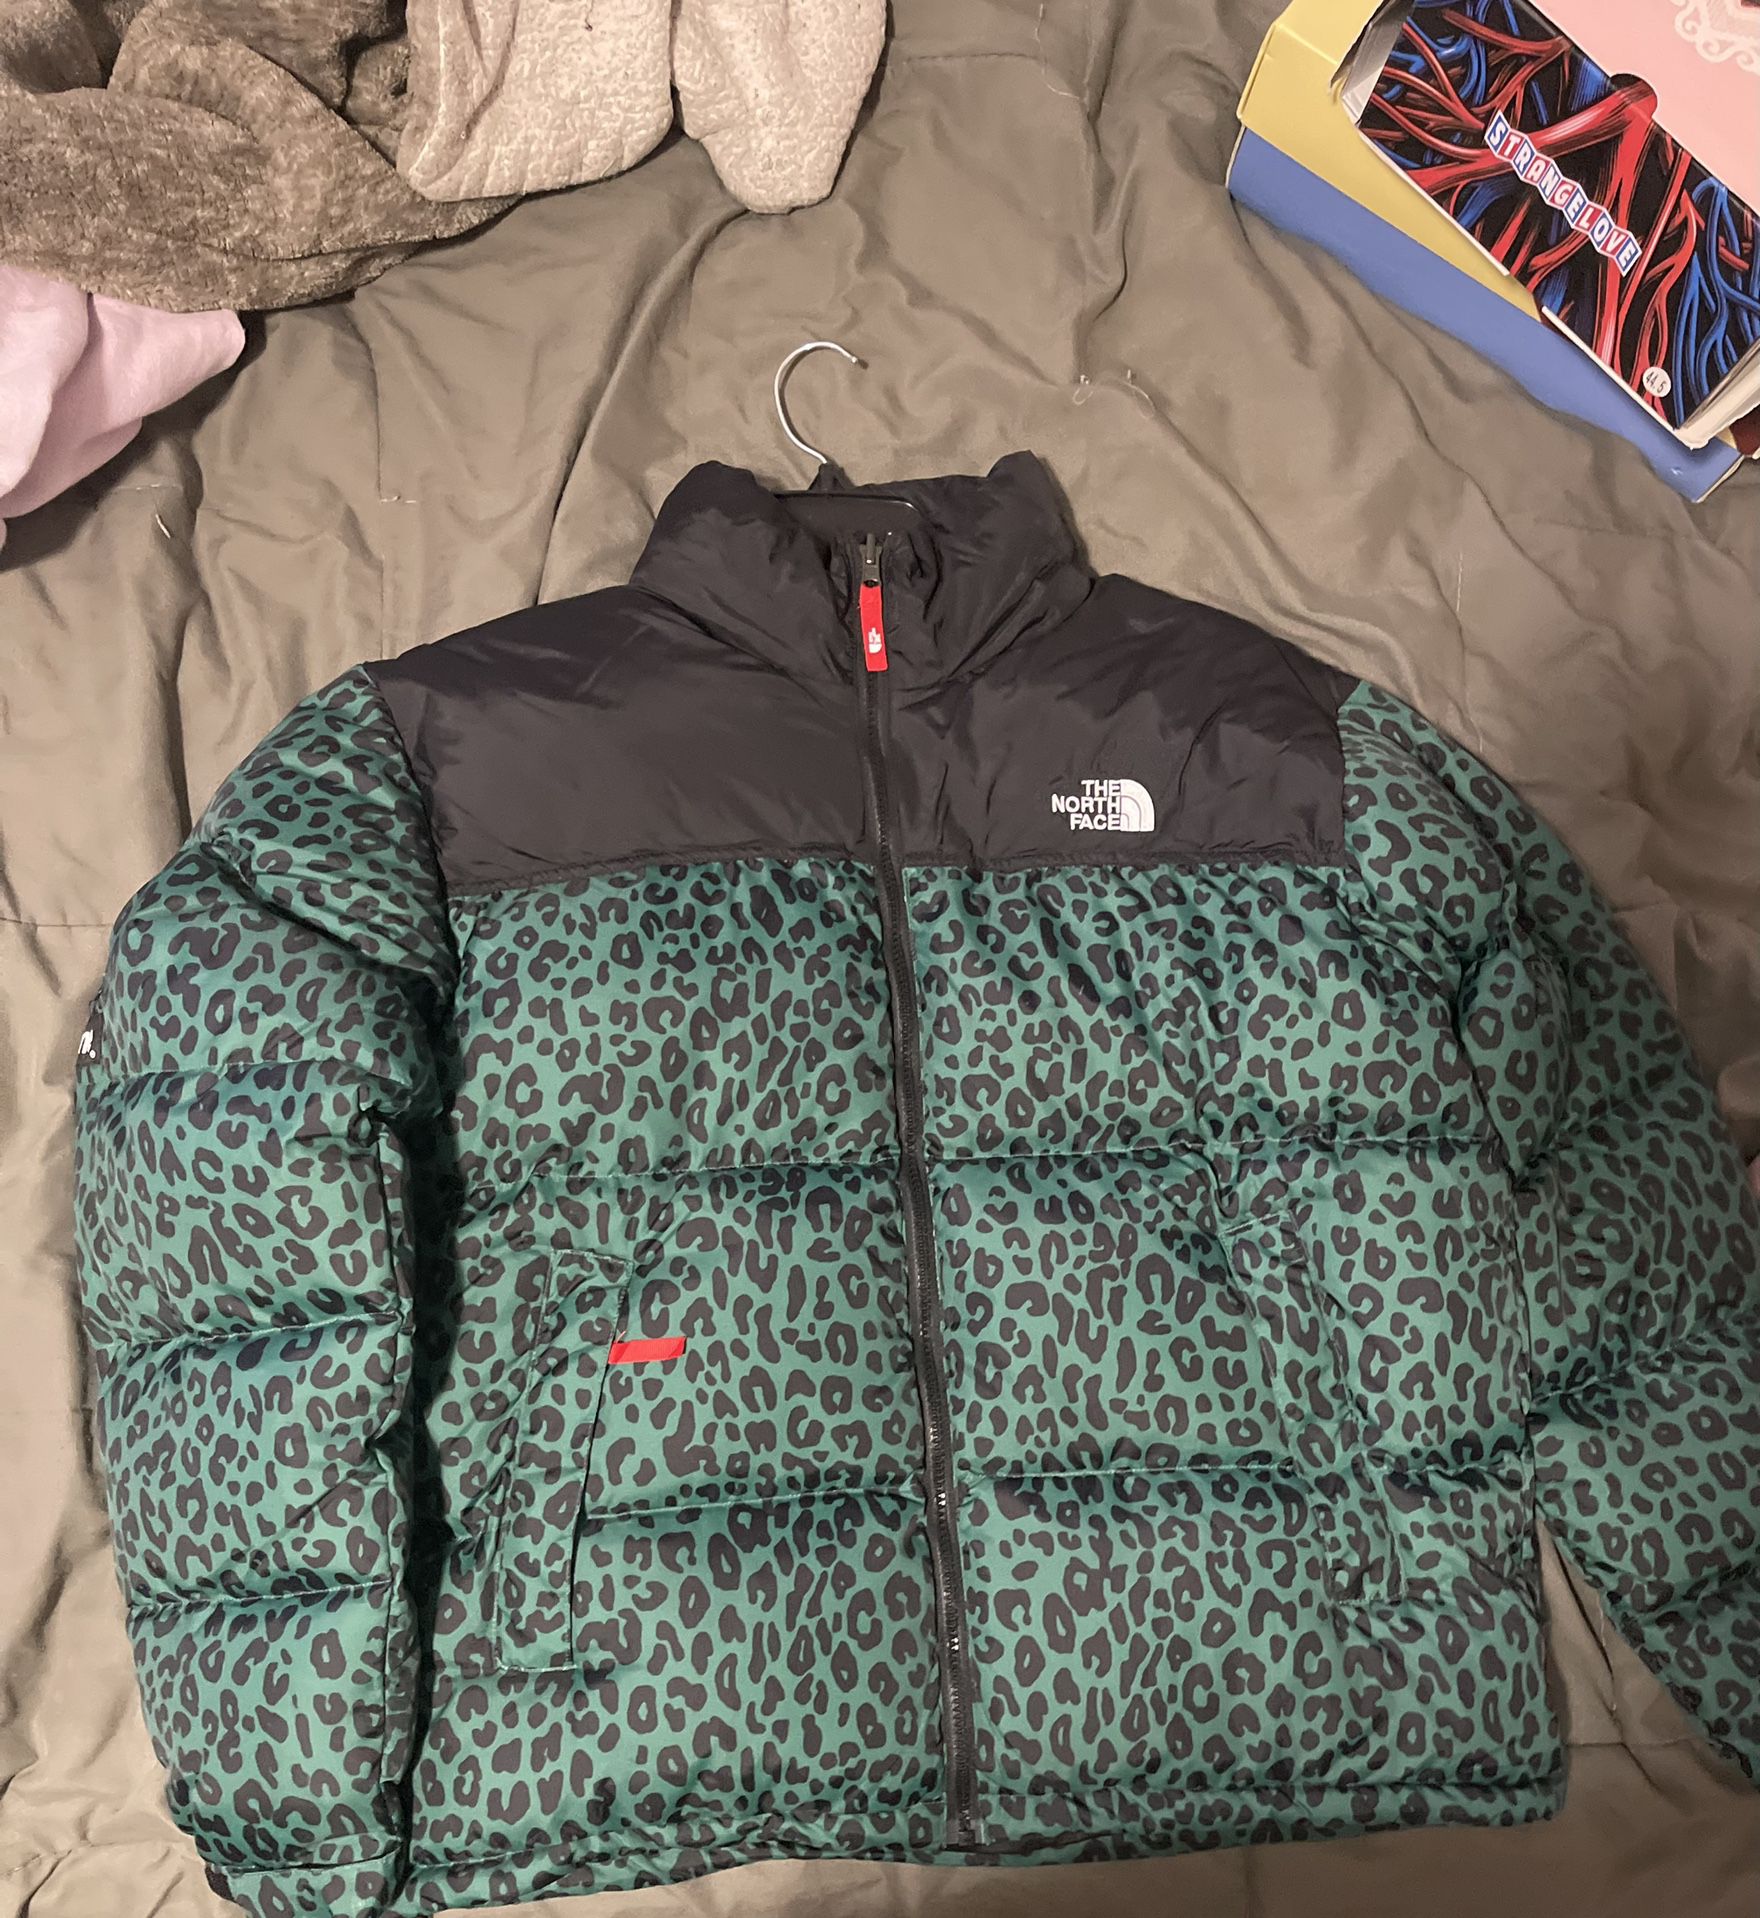 Supreme X North Face Leopard Puffer Jacket